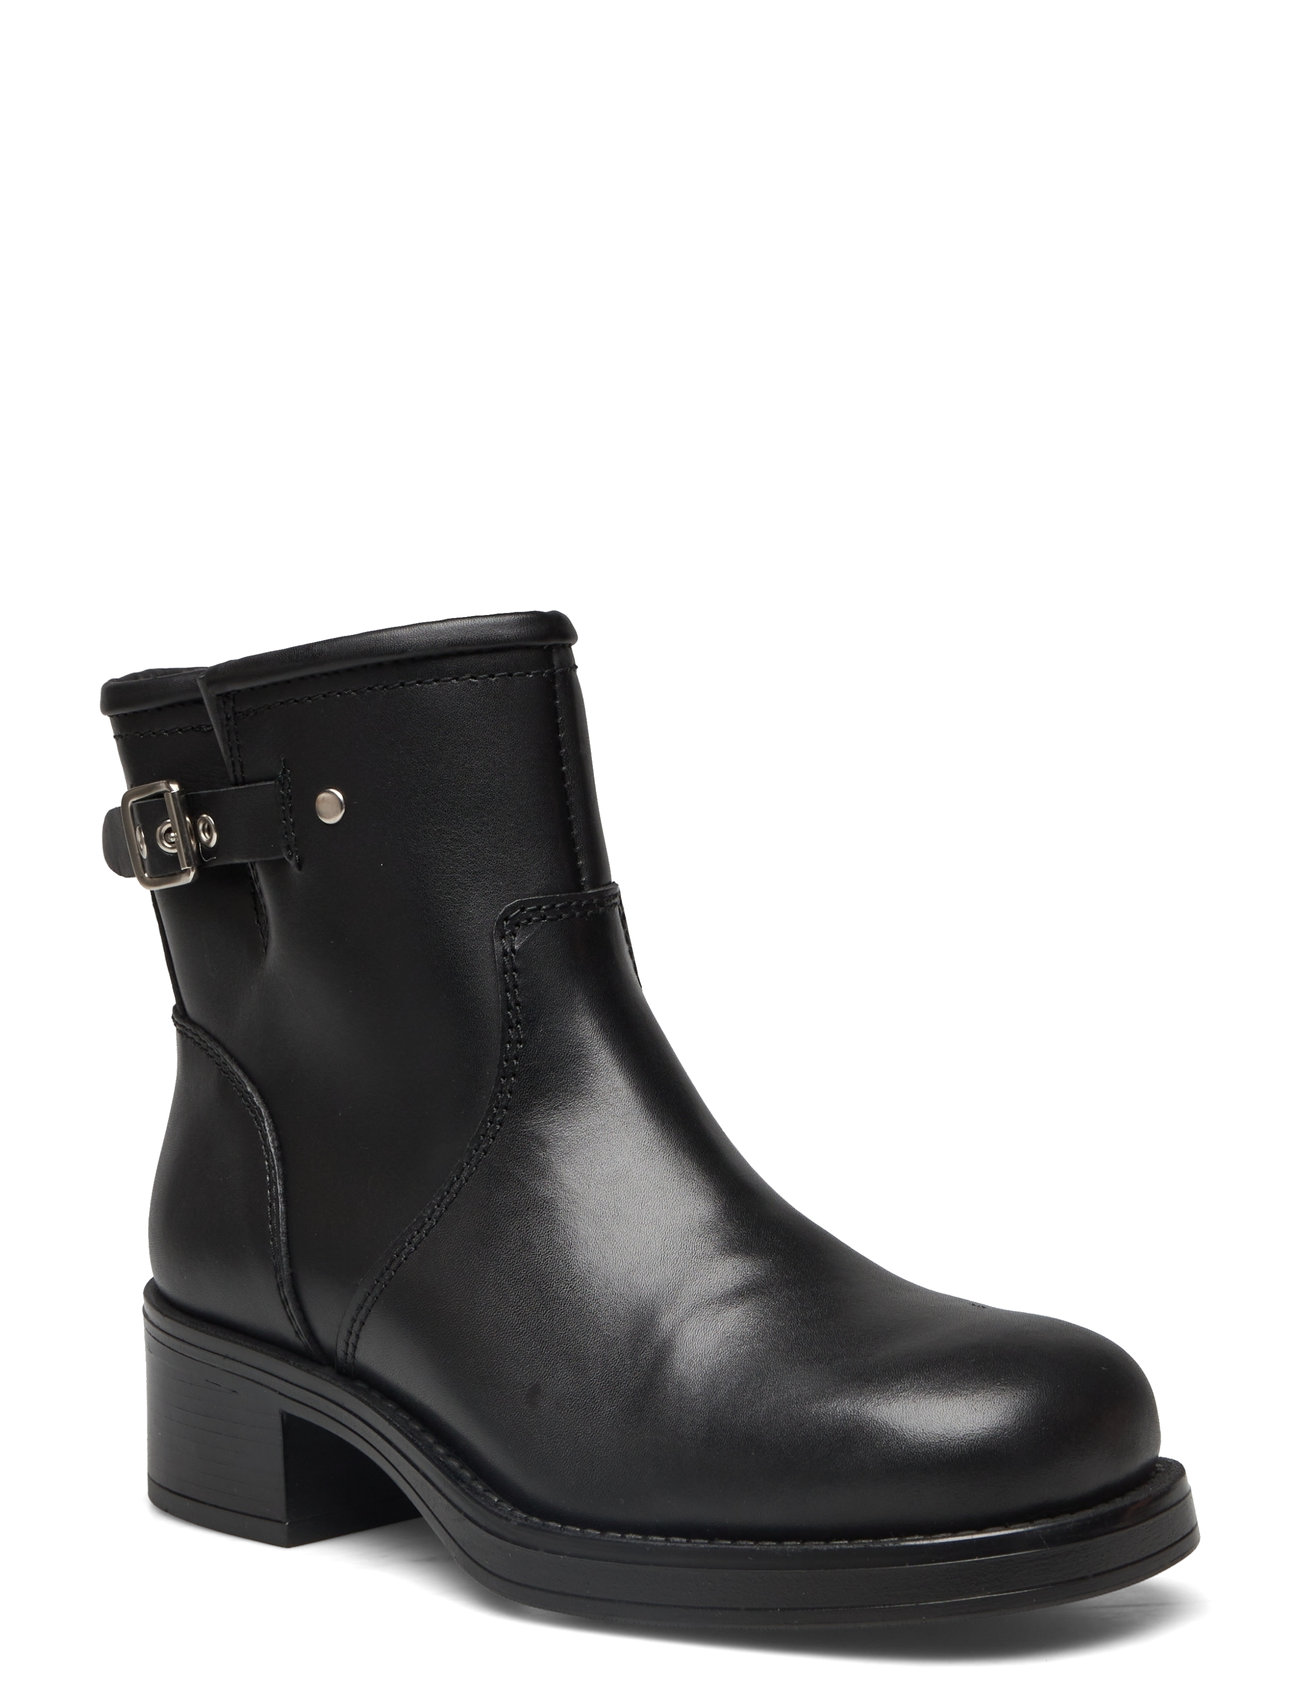 Roselia Shoes Boots Ankle Boots Ankle Boots With Heel Black Pavement